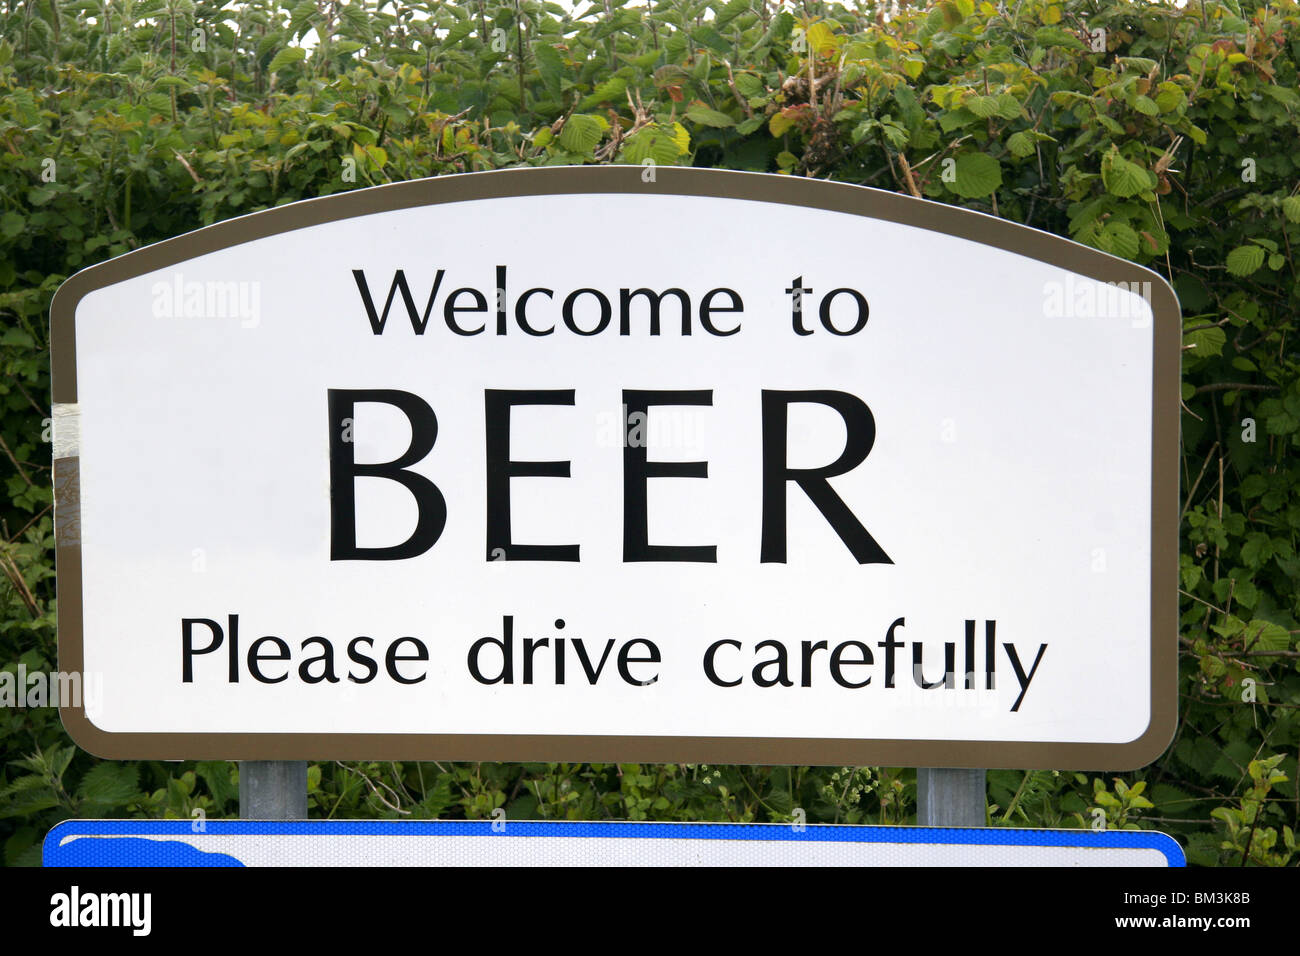 Welcome uk. Beer деревня в Англии. Welcome to the uk. Name sign. Welcome to Town sign.